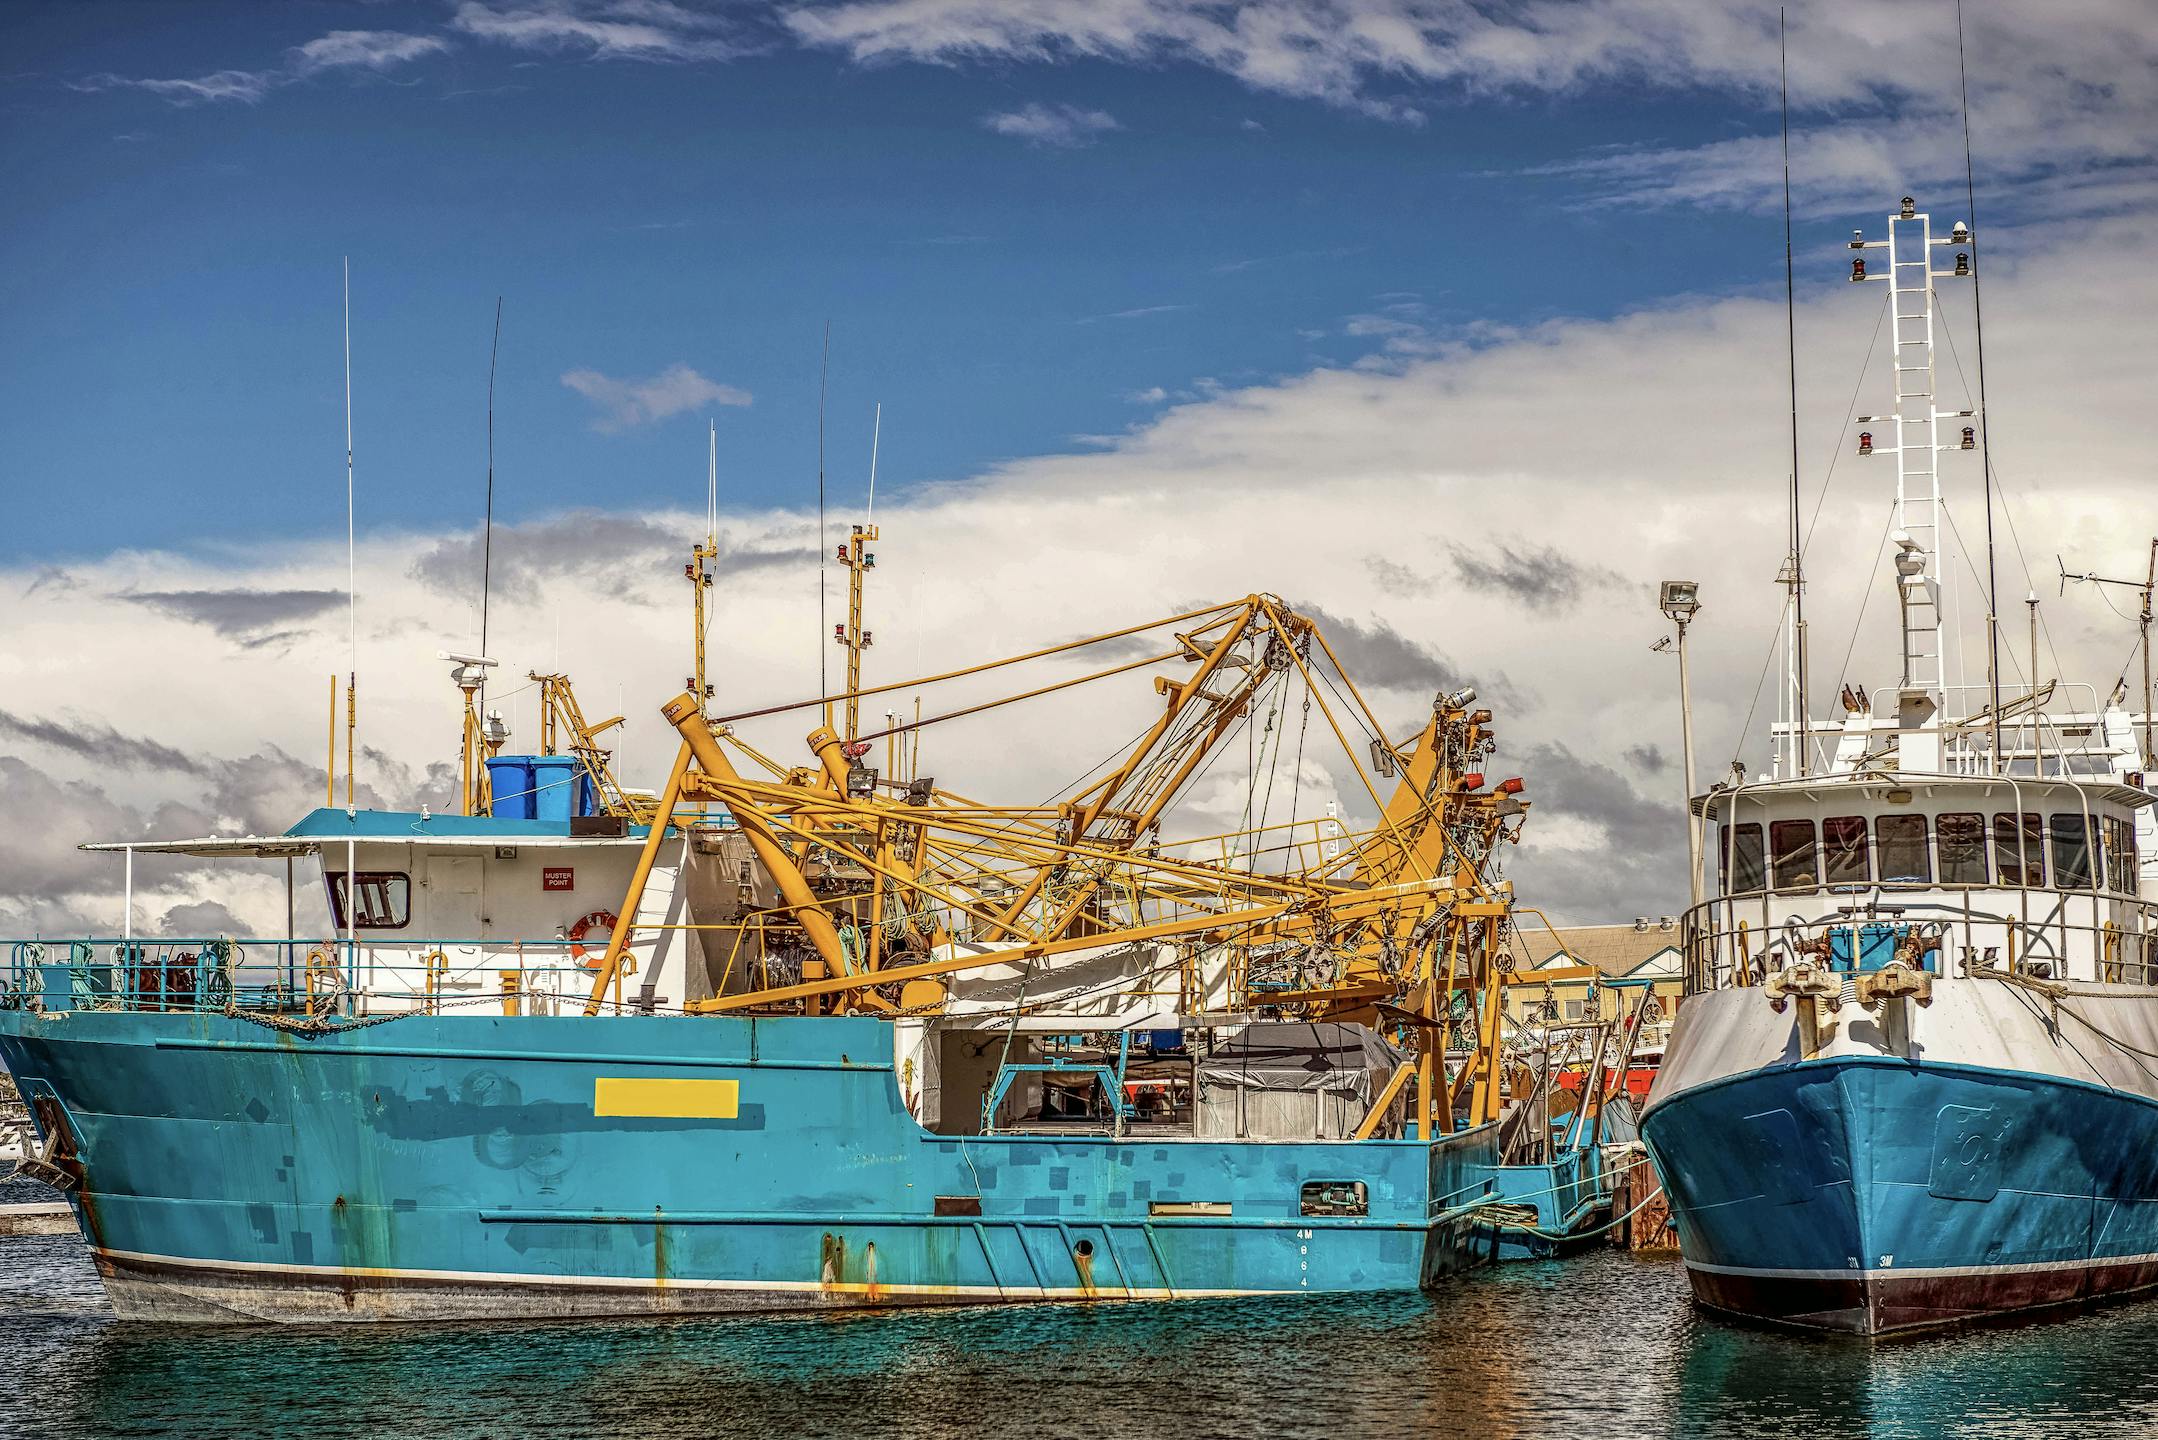 Strengthening the control regime: An important step towards more sustainable fisherie...